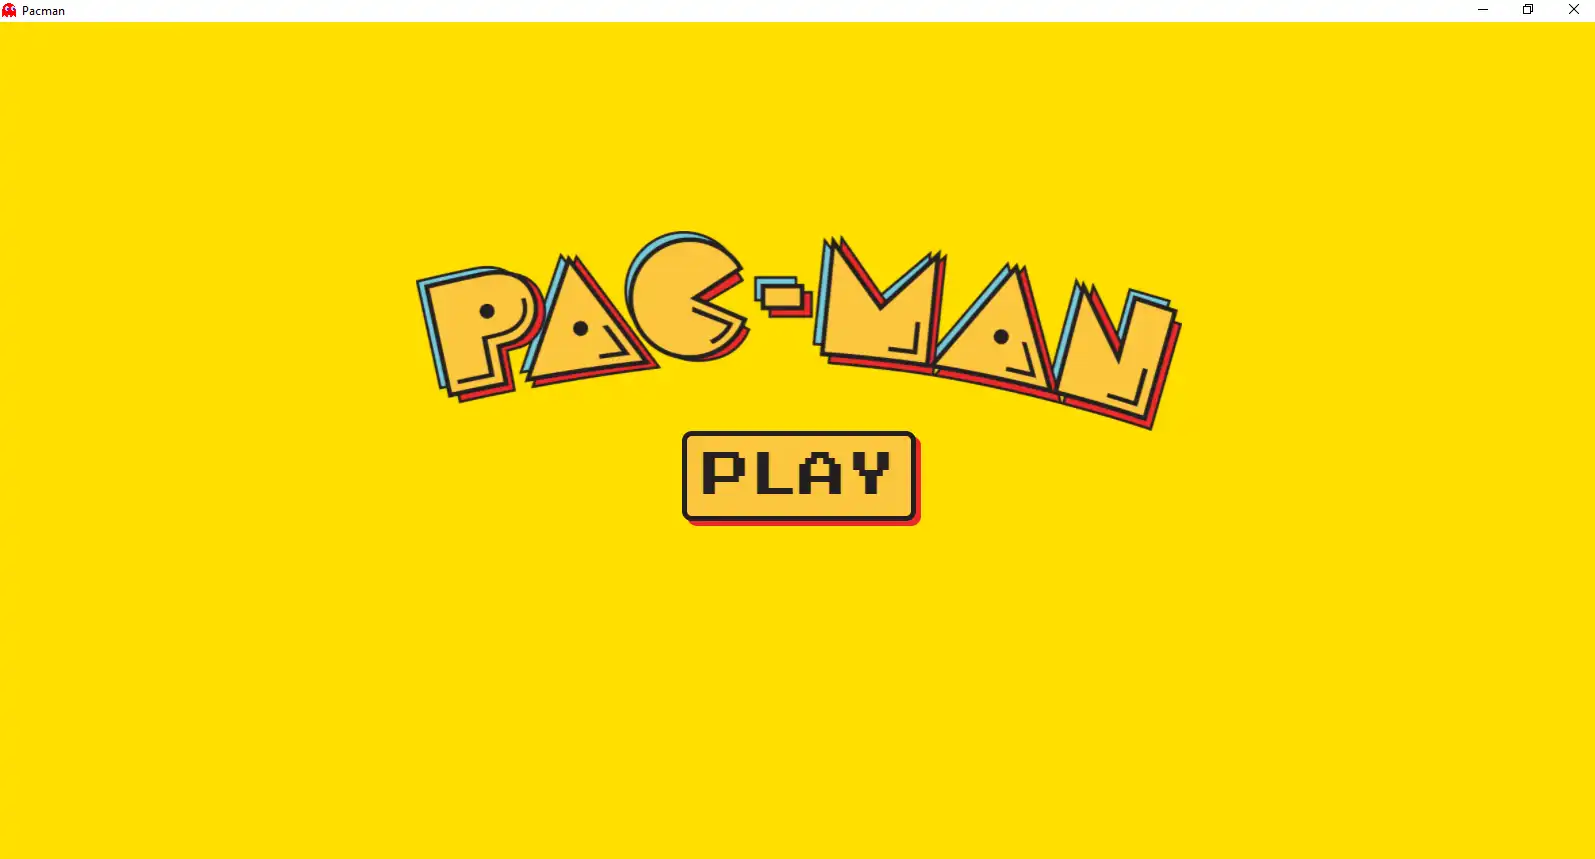 Download web tool or web app Pacman launcher